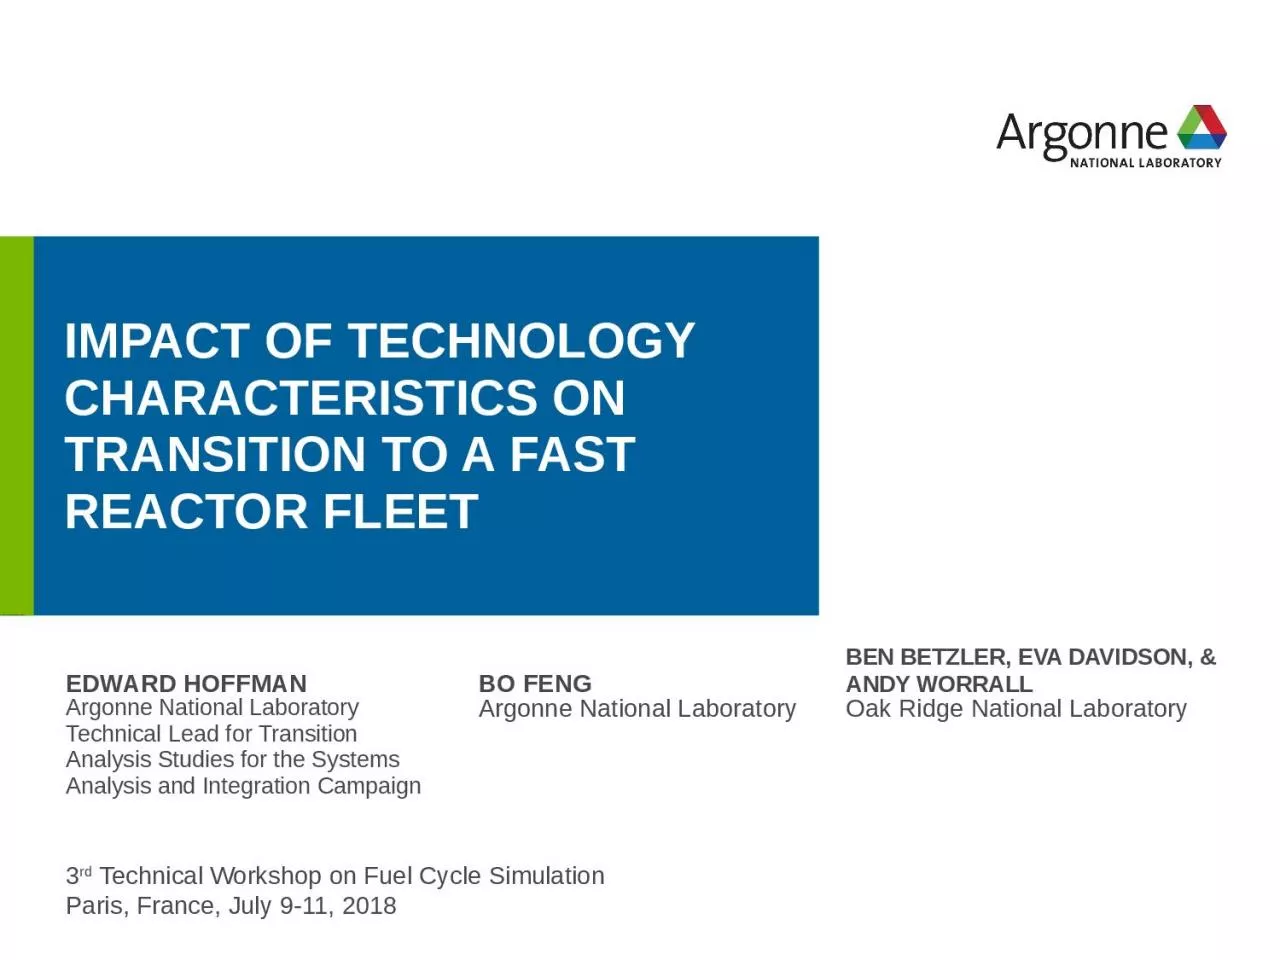 Impact of Technology Characteristics on Transition to a Fast Reactor Fleet